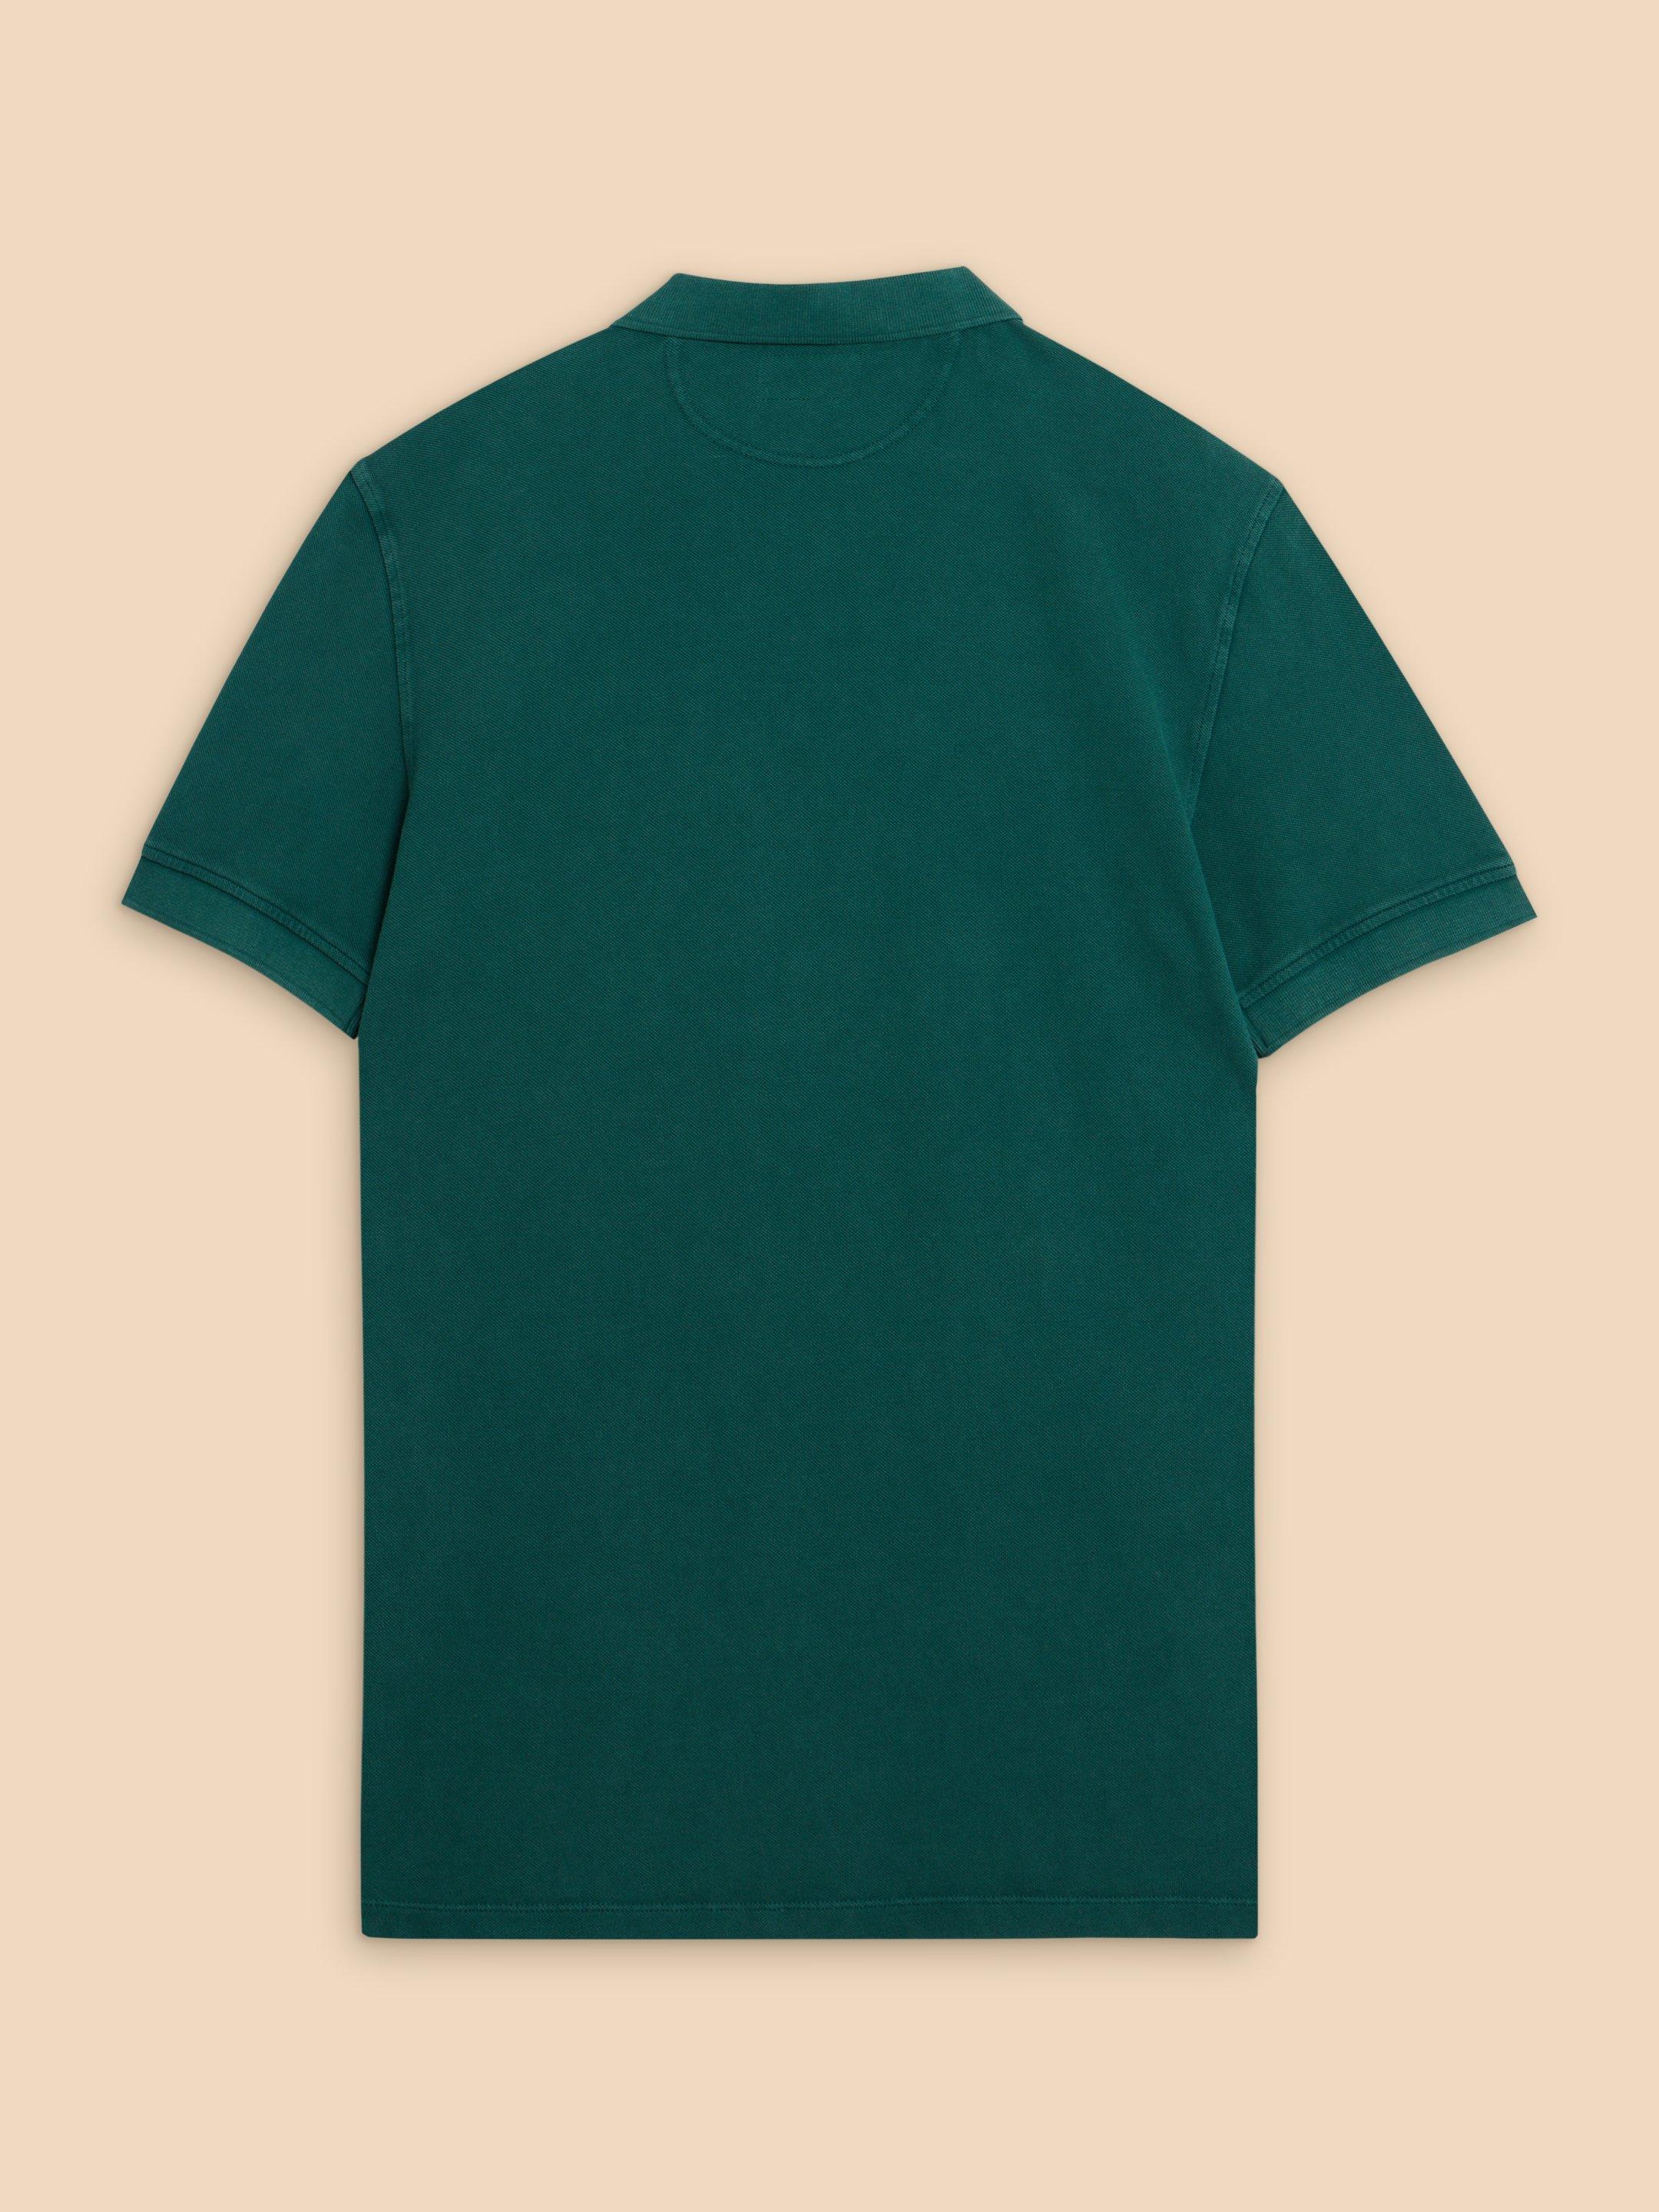 Utility Polo in DK TEAL - FLAT BACK